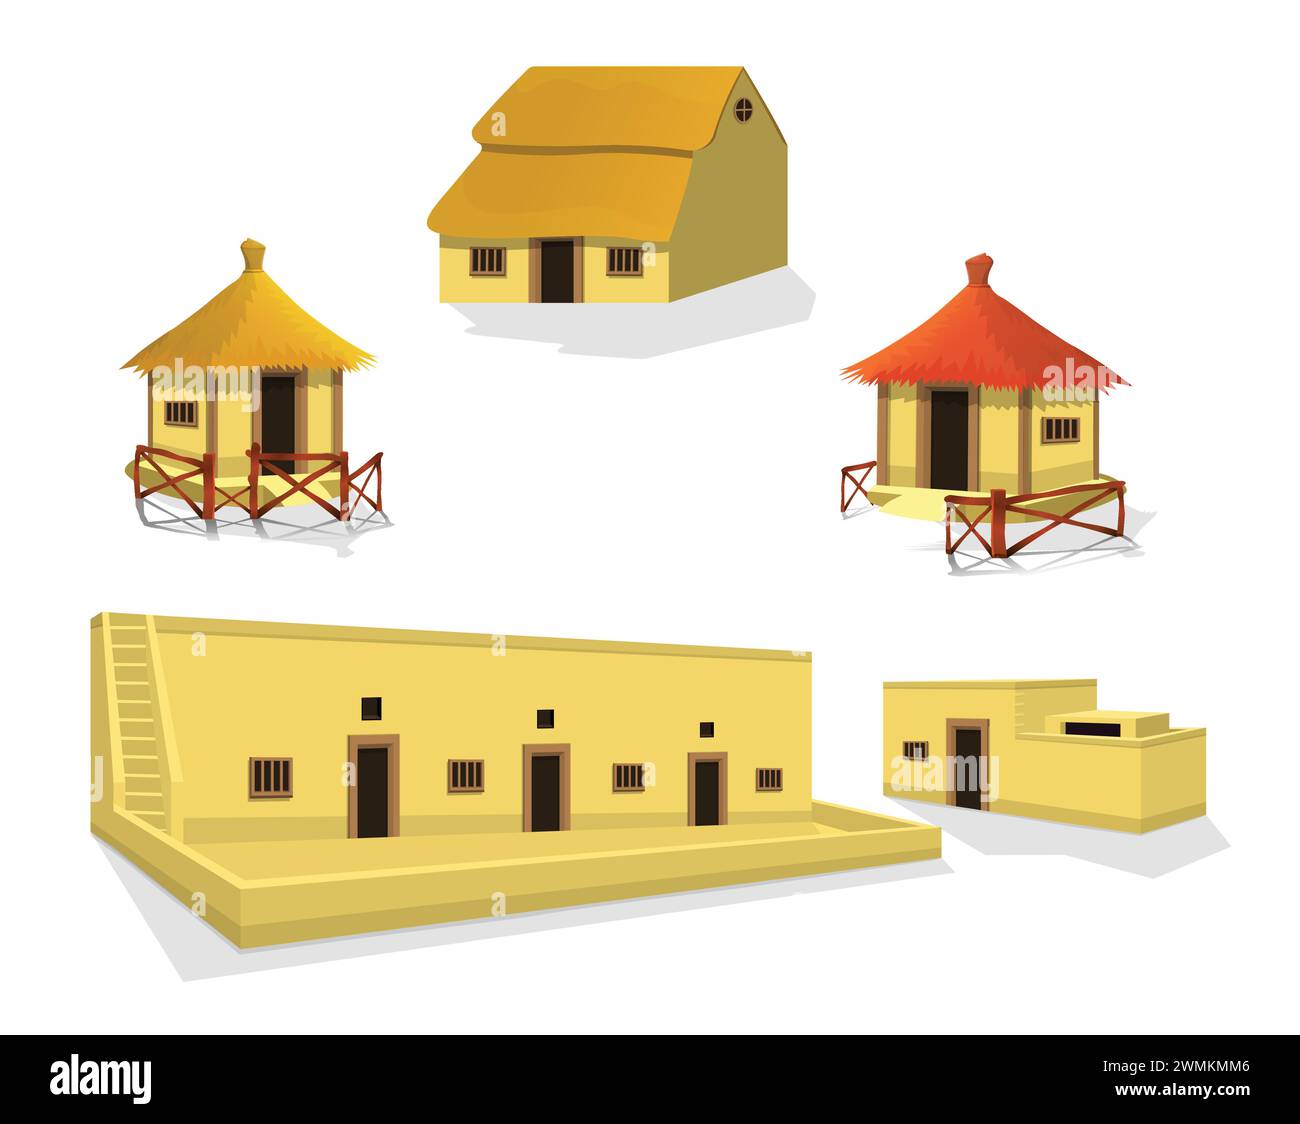 African style traditional mud house collection, african or asian tribes, bungalow with thatched roof clip art vector illustration Stock Vector